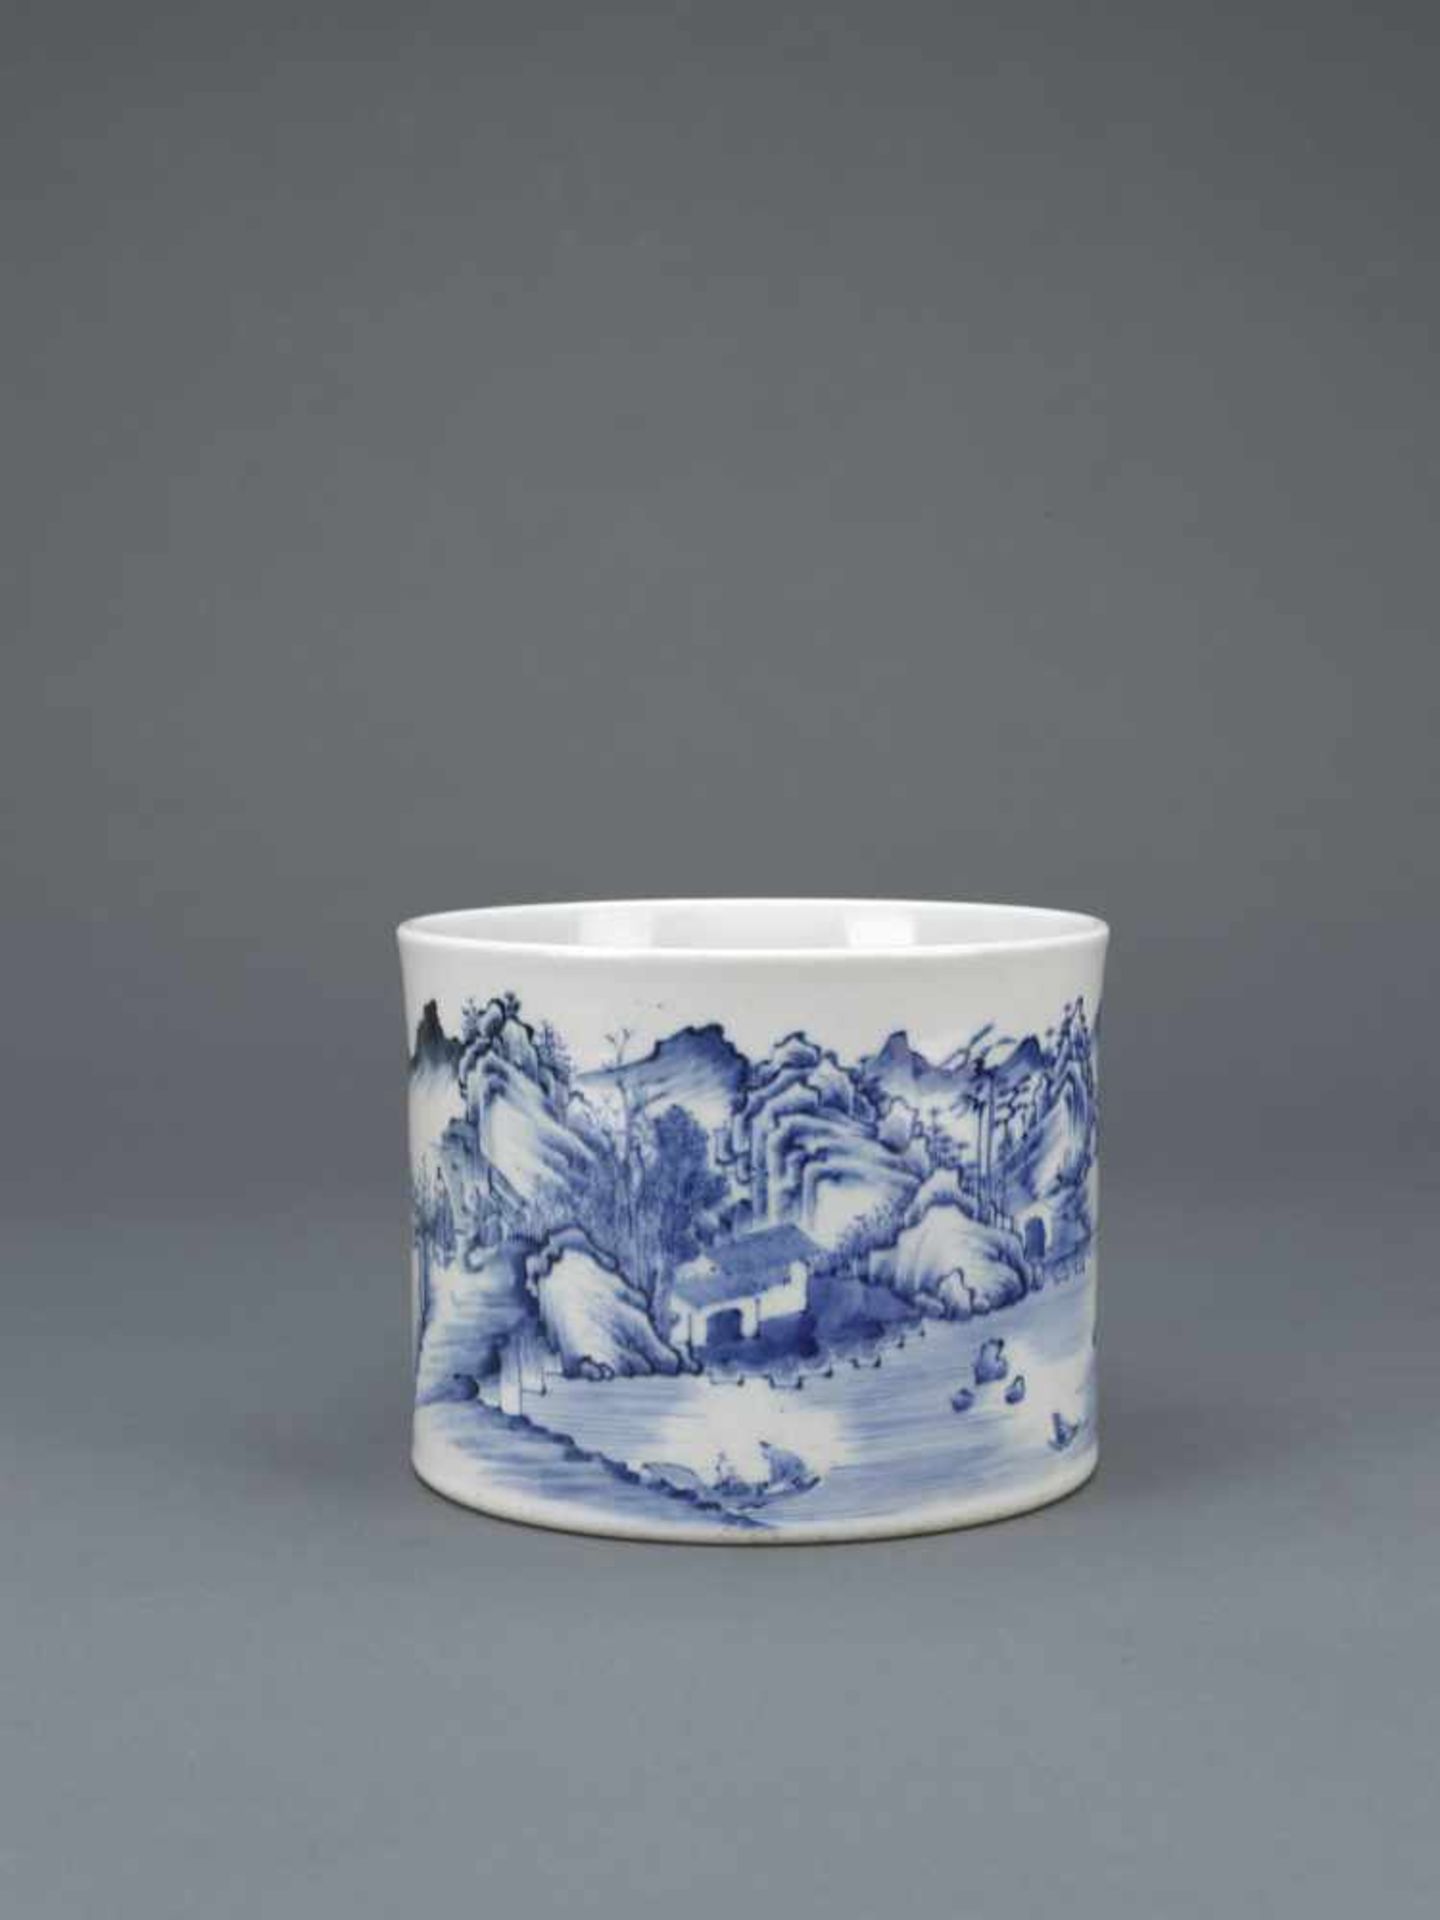 A BLUE AND WHITE 'LANDSCAPE' BRUSHPOT,QING DYNASTY.Blau-weißer Pinselhalter – China, Qing-